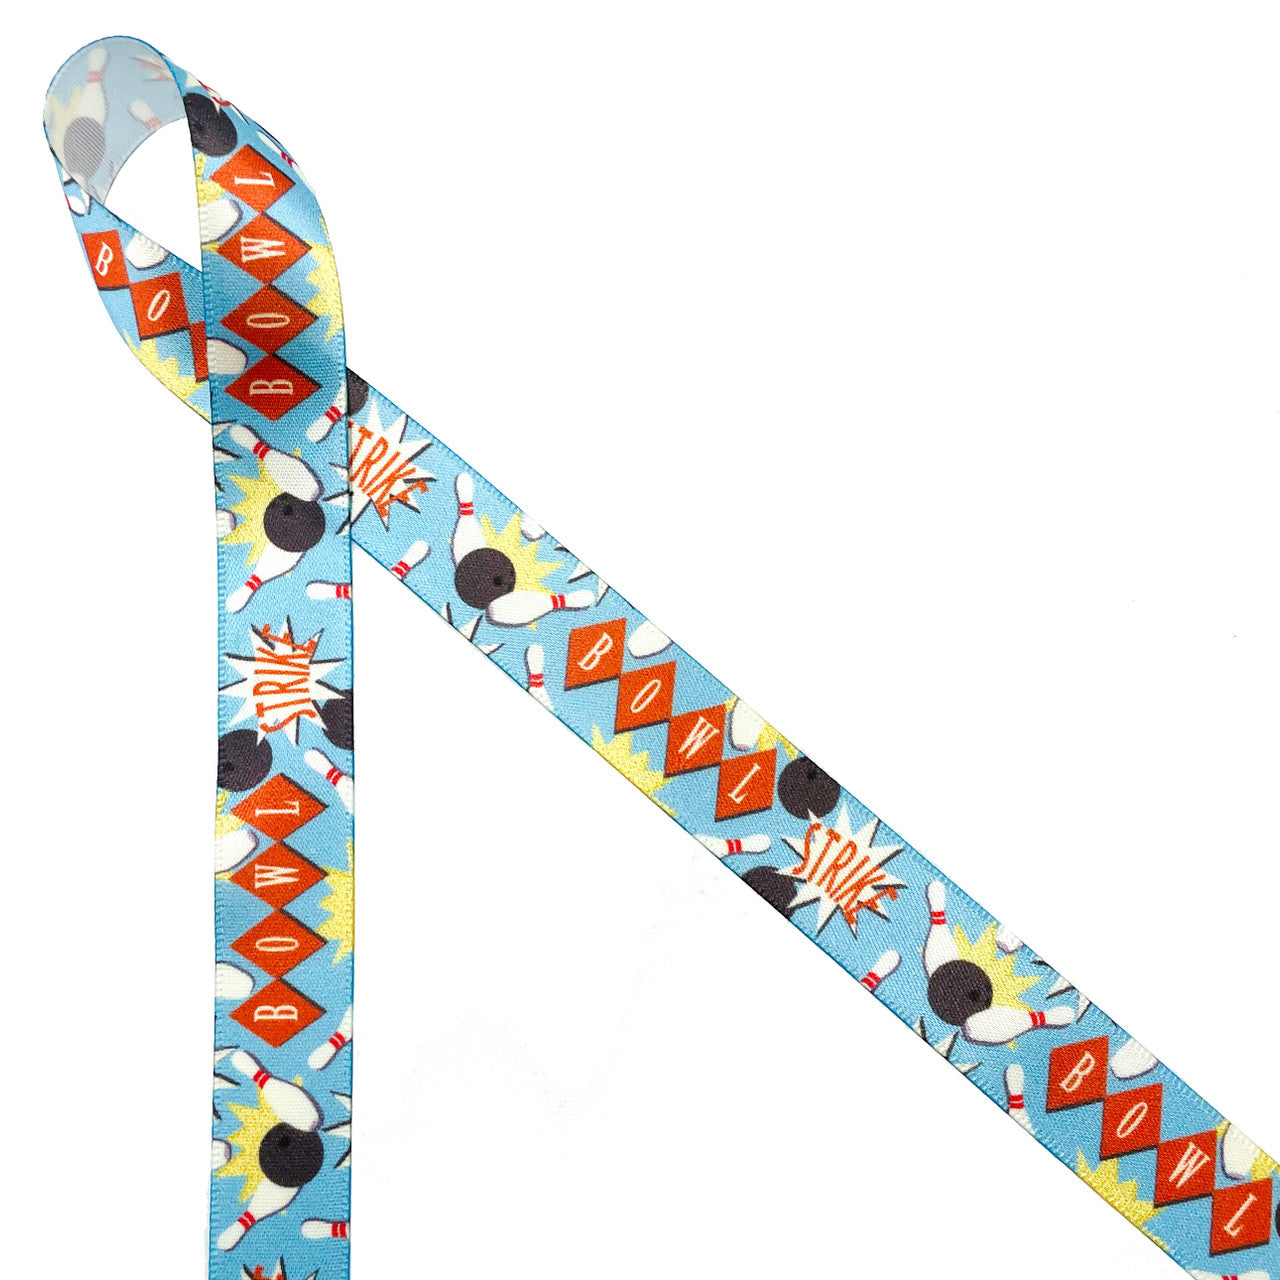 Bowling themed ribbon on a light blue background featuring bowling balls, pins in red and white and the words Bowling and Strike across the ribbon carries a vintage theme throughout. This is a great ribbon for party decor, party favors, gift wrap, bowling leagues and banquets. Use this ribbon for sports themed wreaths, crafts, scrapbooking and quilts! Designed and printed in the USA